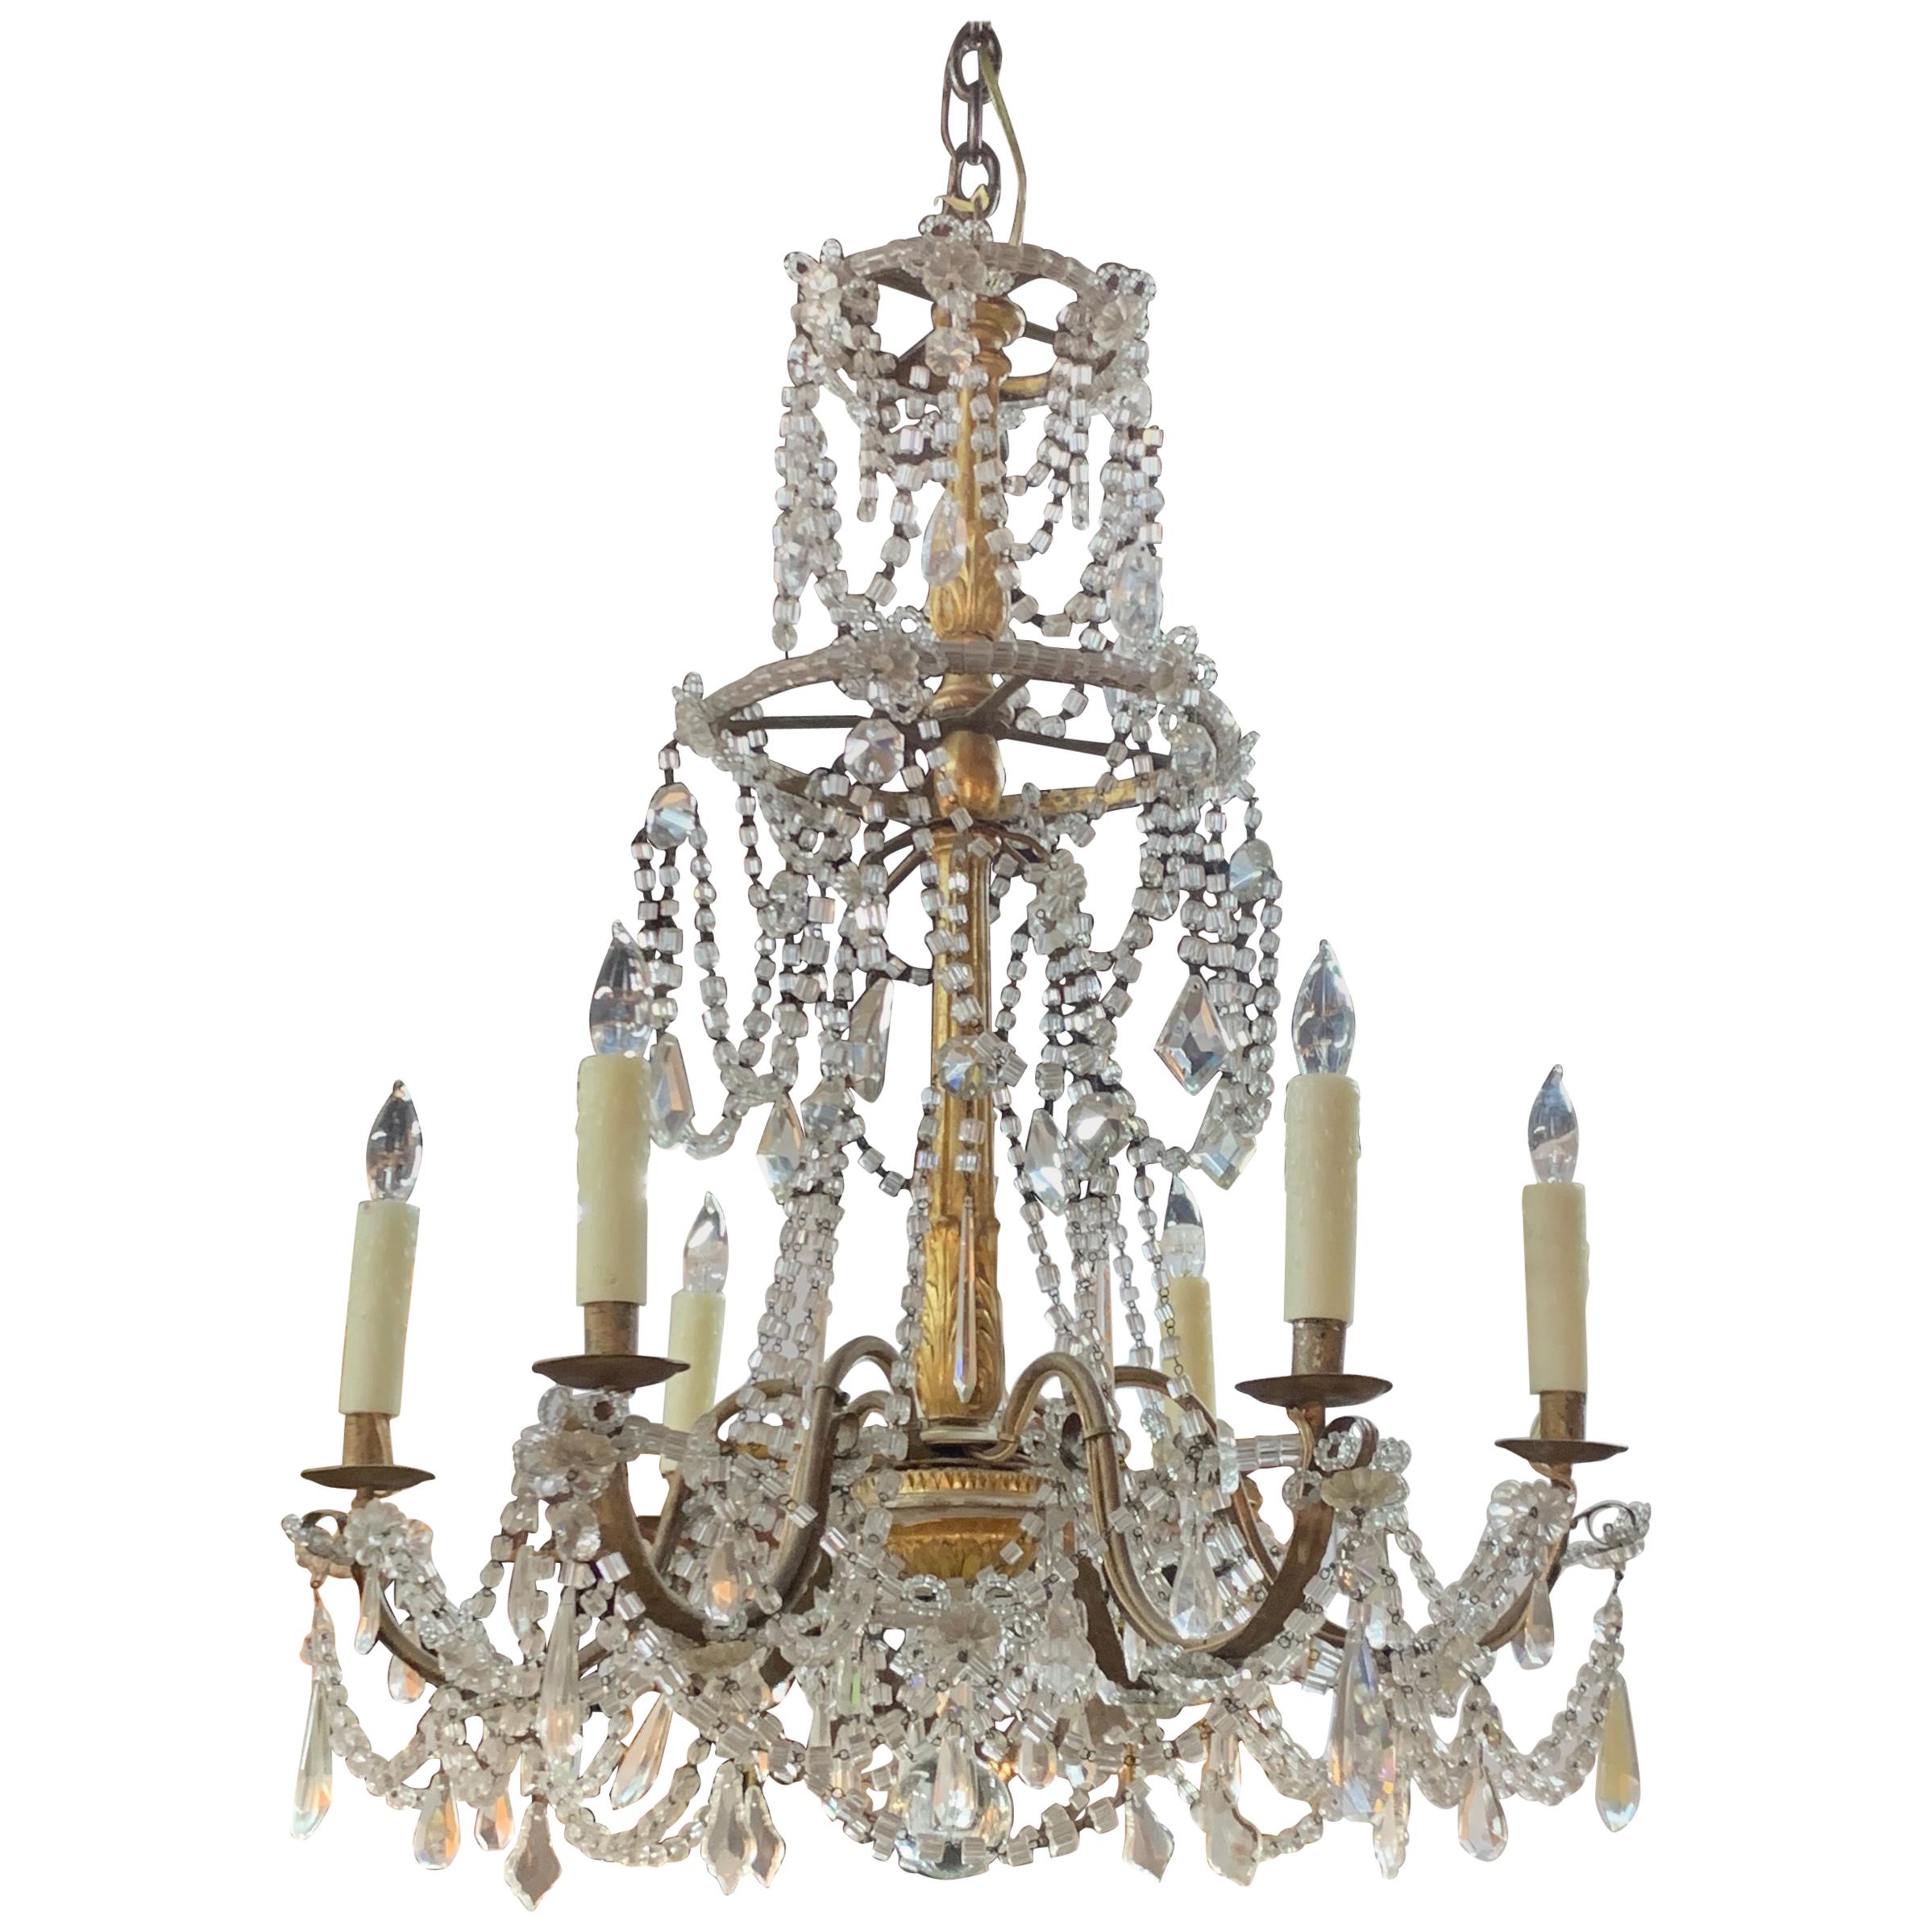 19th Century Giltwood and Crystal 6-Light Chandelier